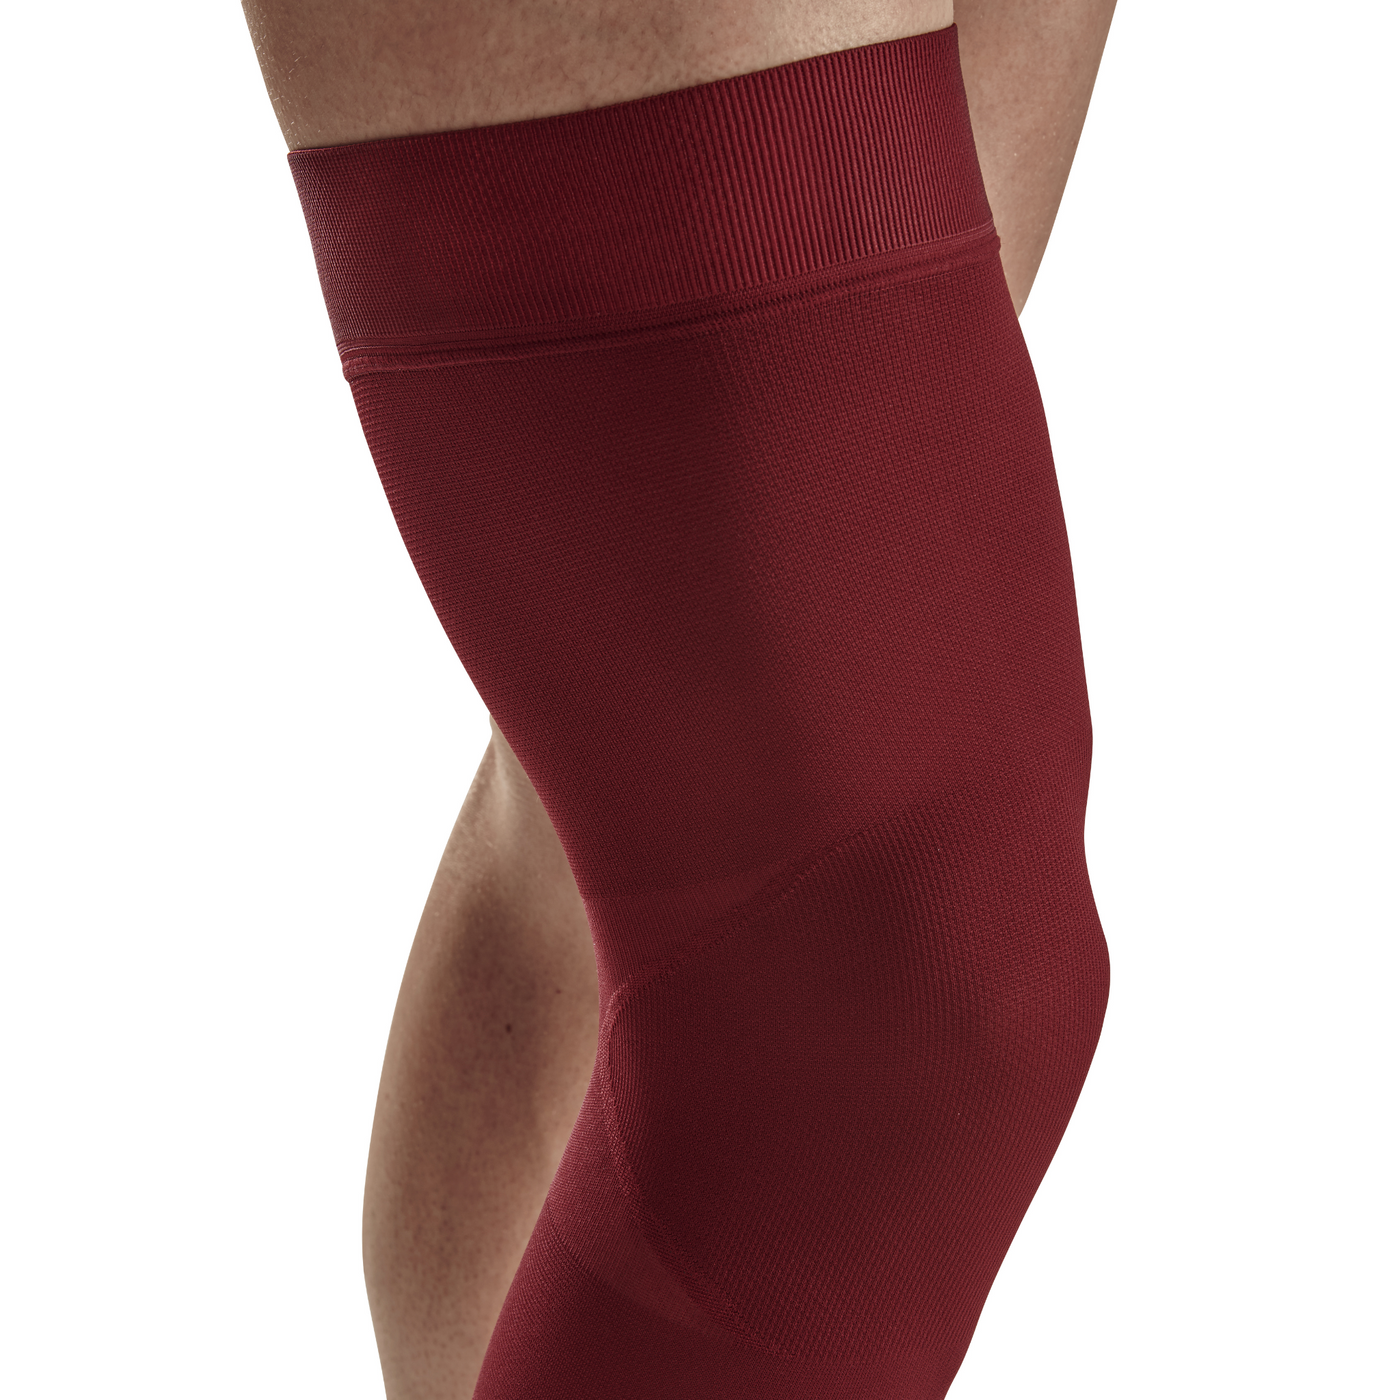 Light Support Knee Sleeve, Red-Light, Front Detail View